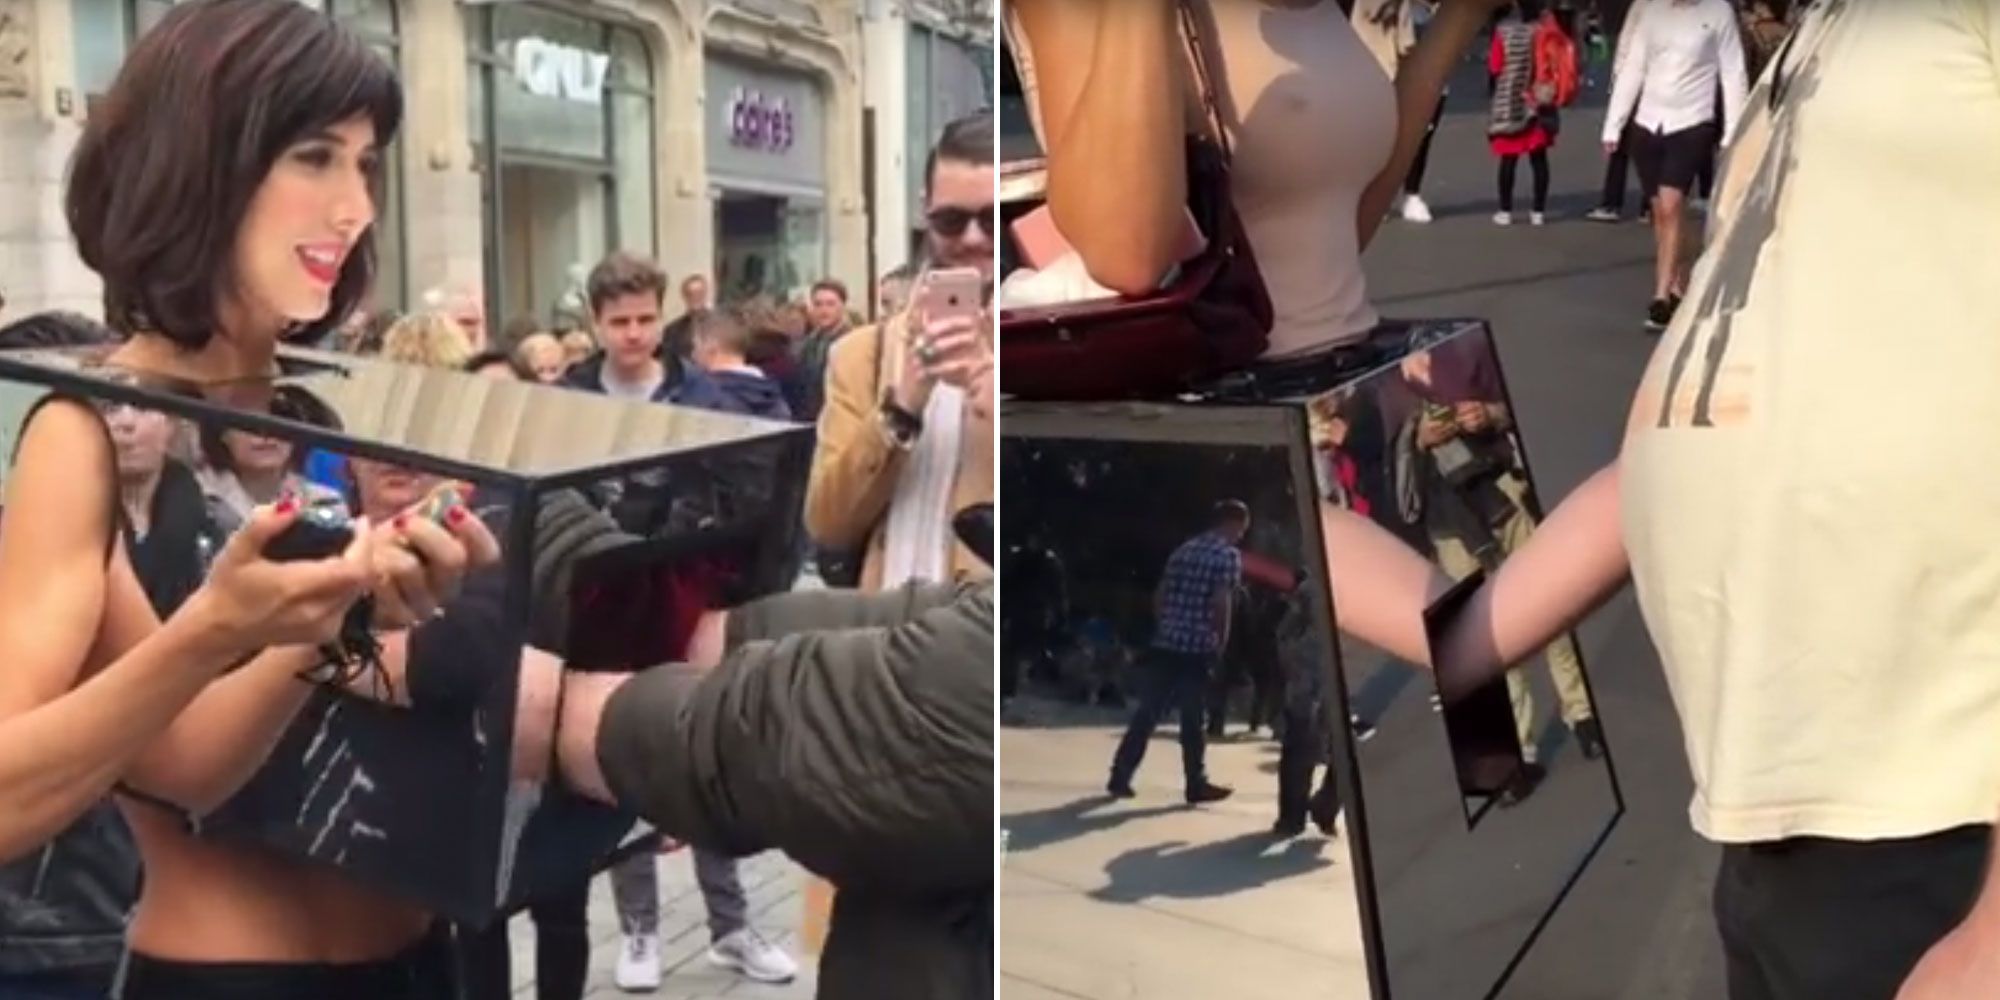 Artist Milo Moire Let People Touch Her Vagina in Public photo image